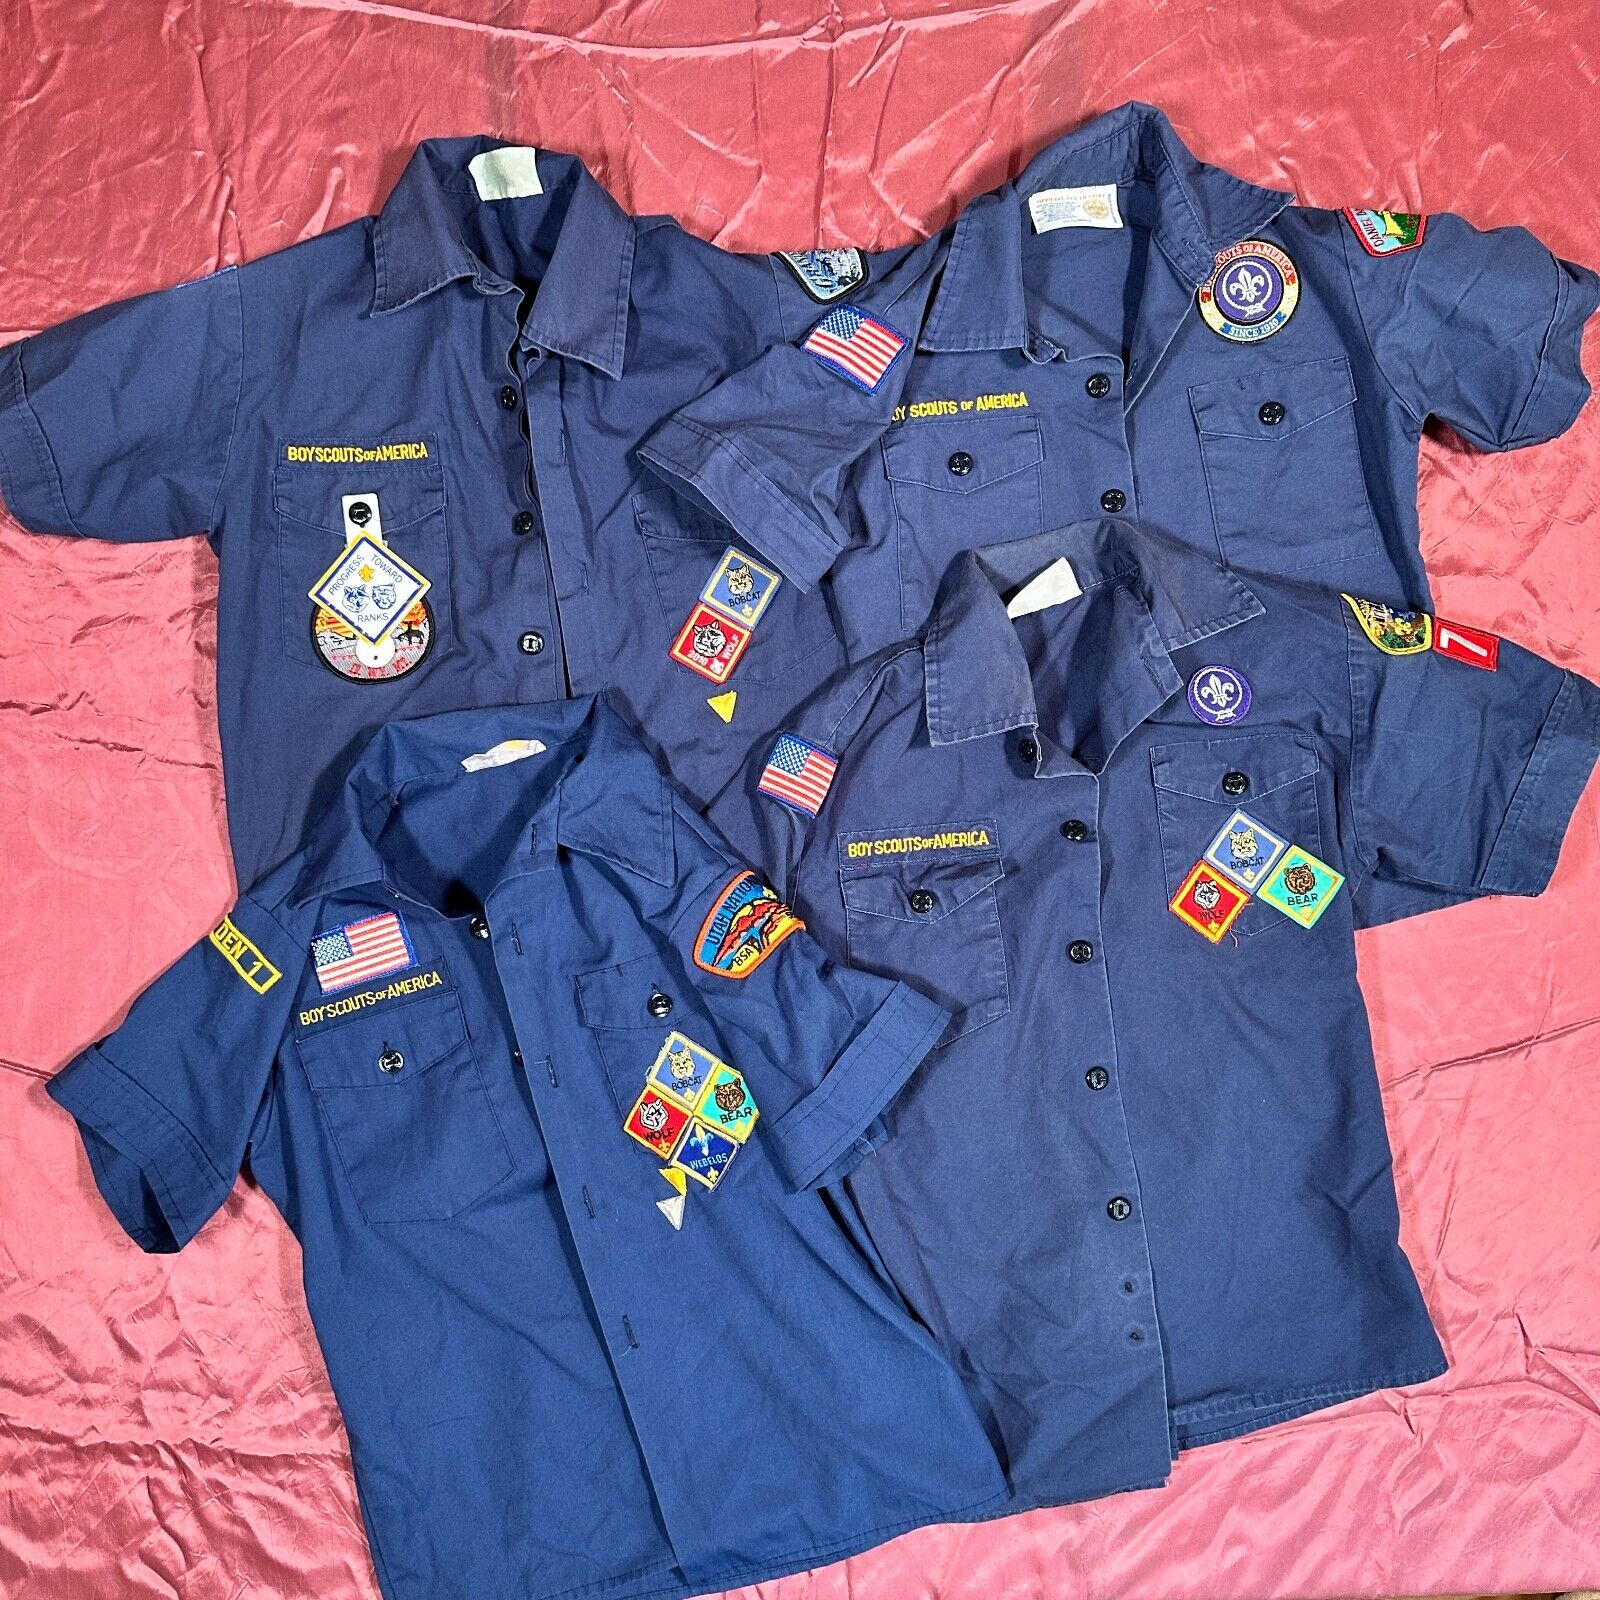 Boy Scouts of America lot of 4 tshirt cub scouts various sizes